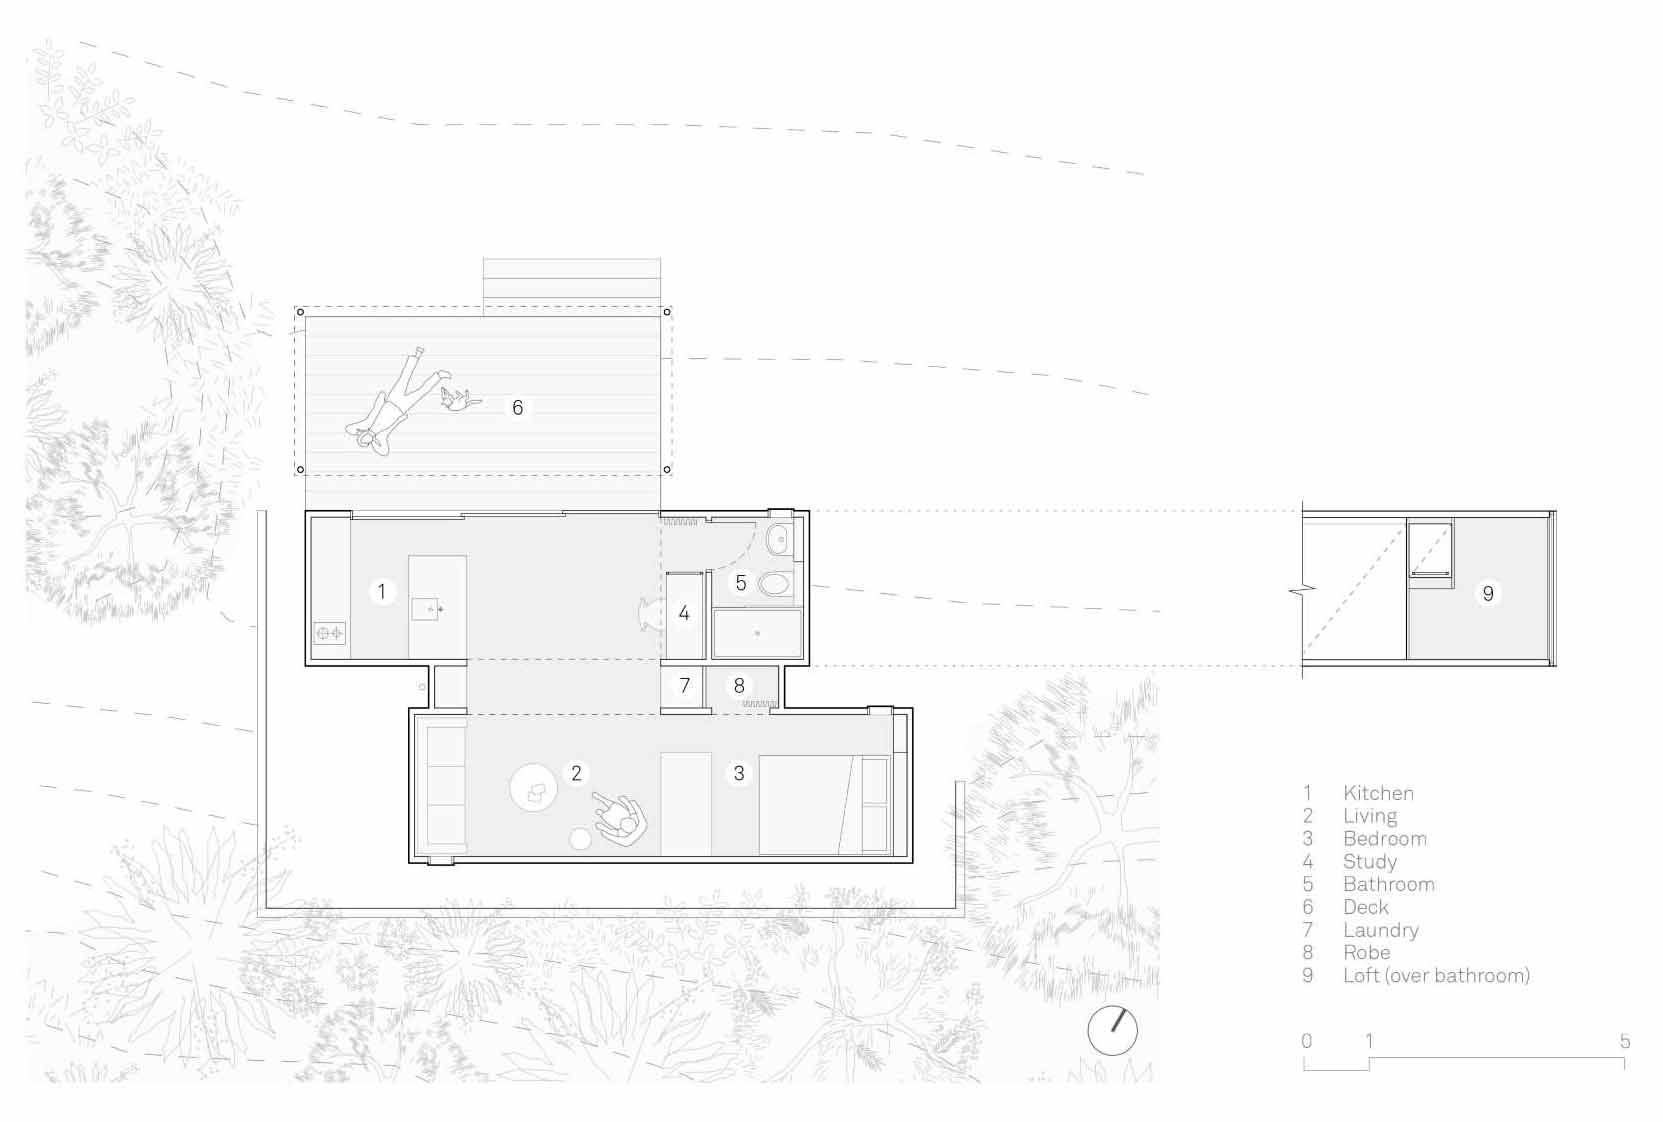 The floor plan of a small one-bedroom home.